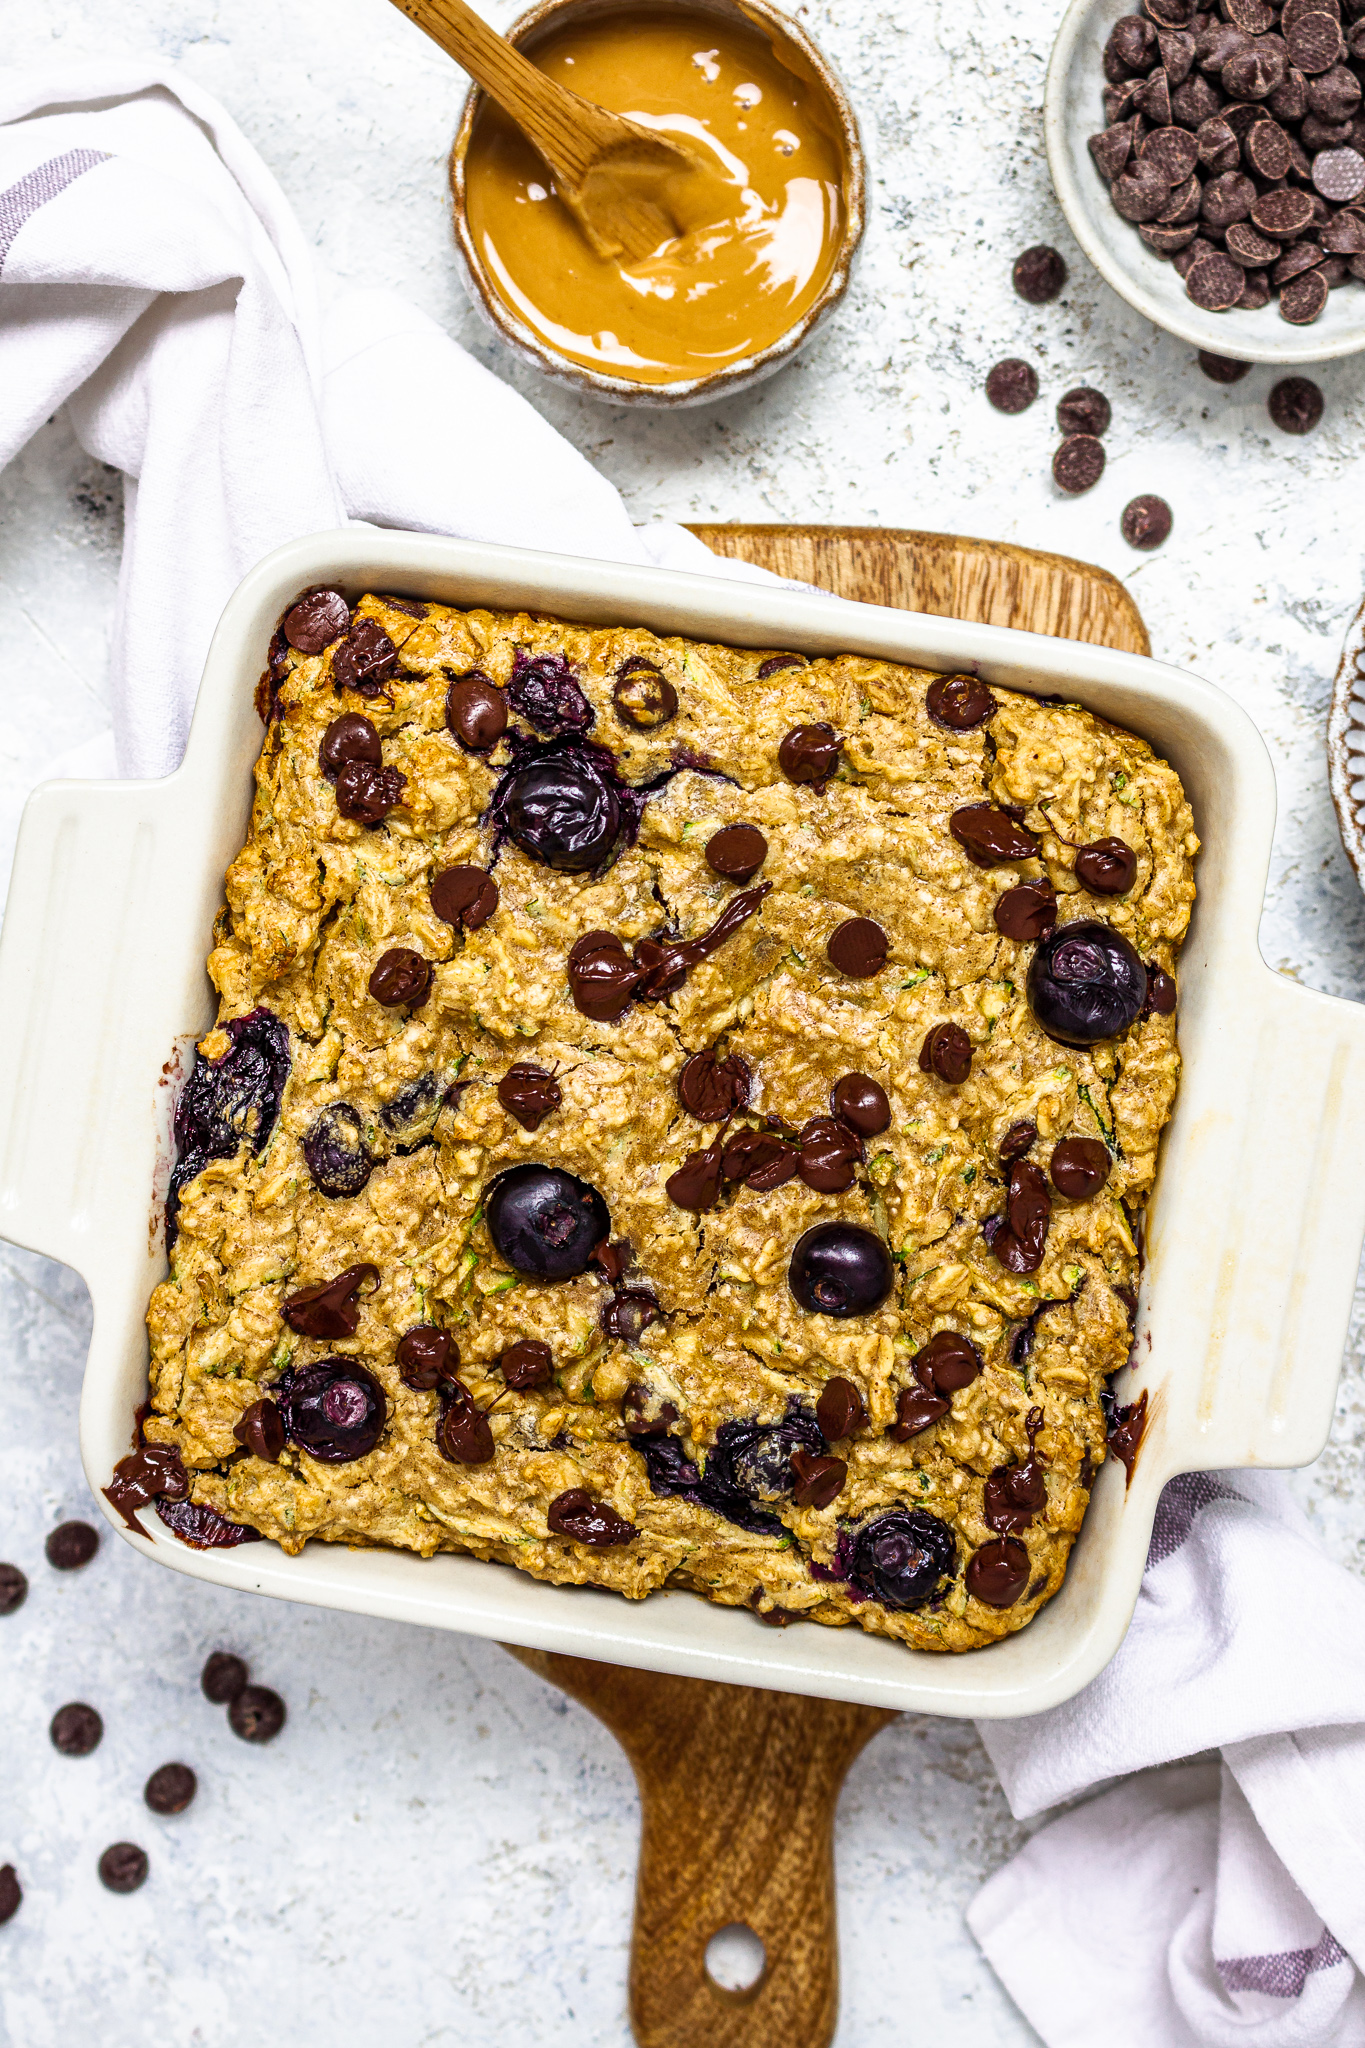 Peanut Butter Blueberry Chocolate Chip Courgette Baked Oats